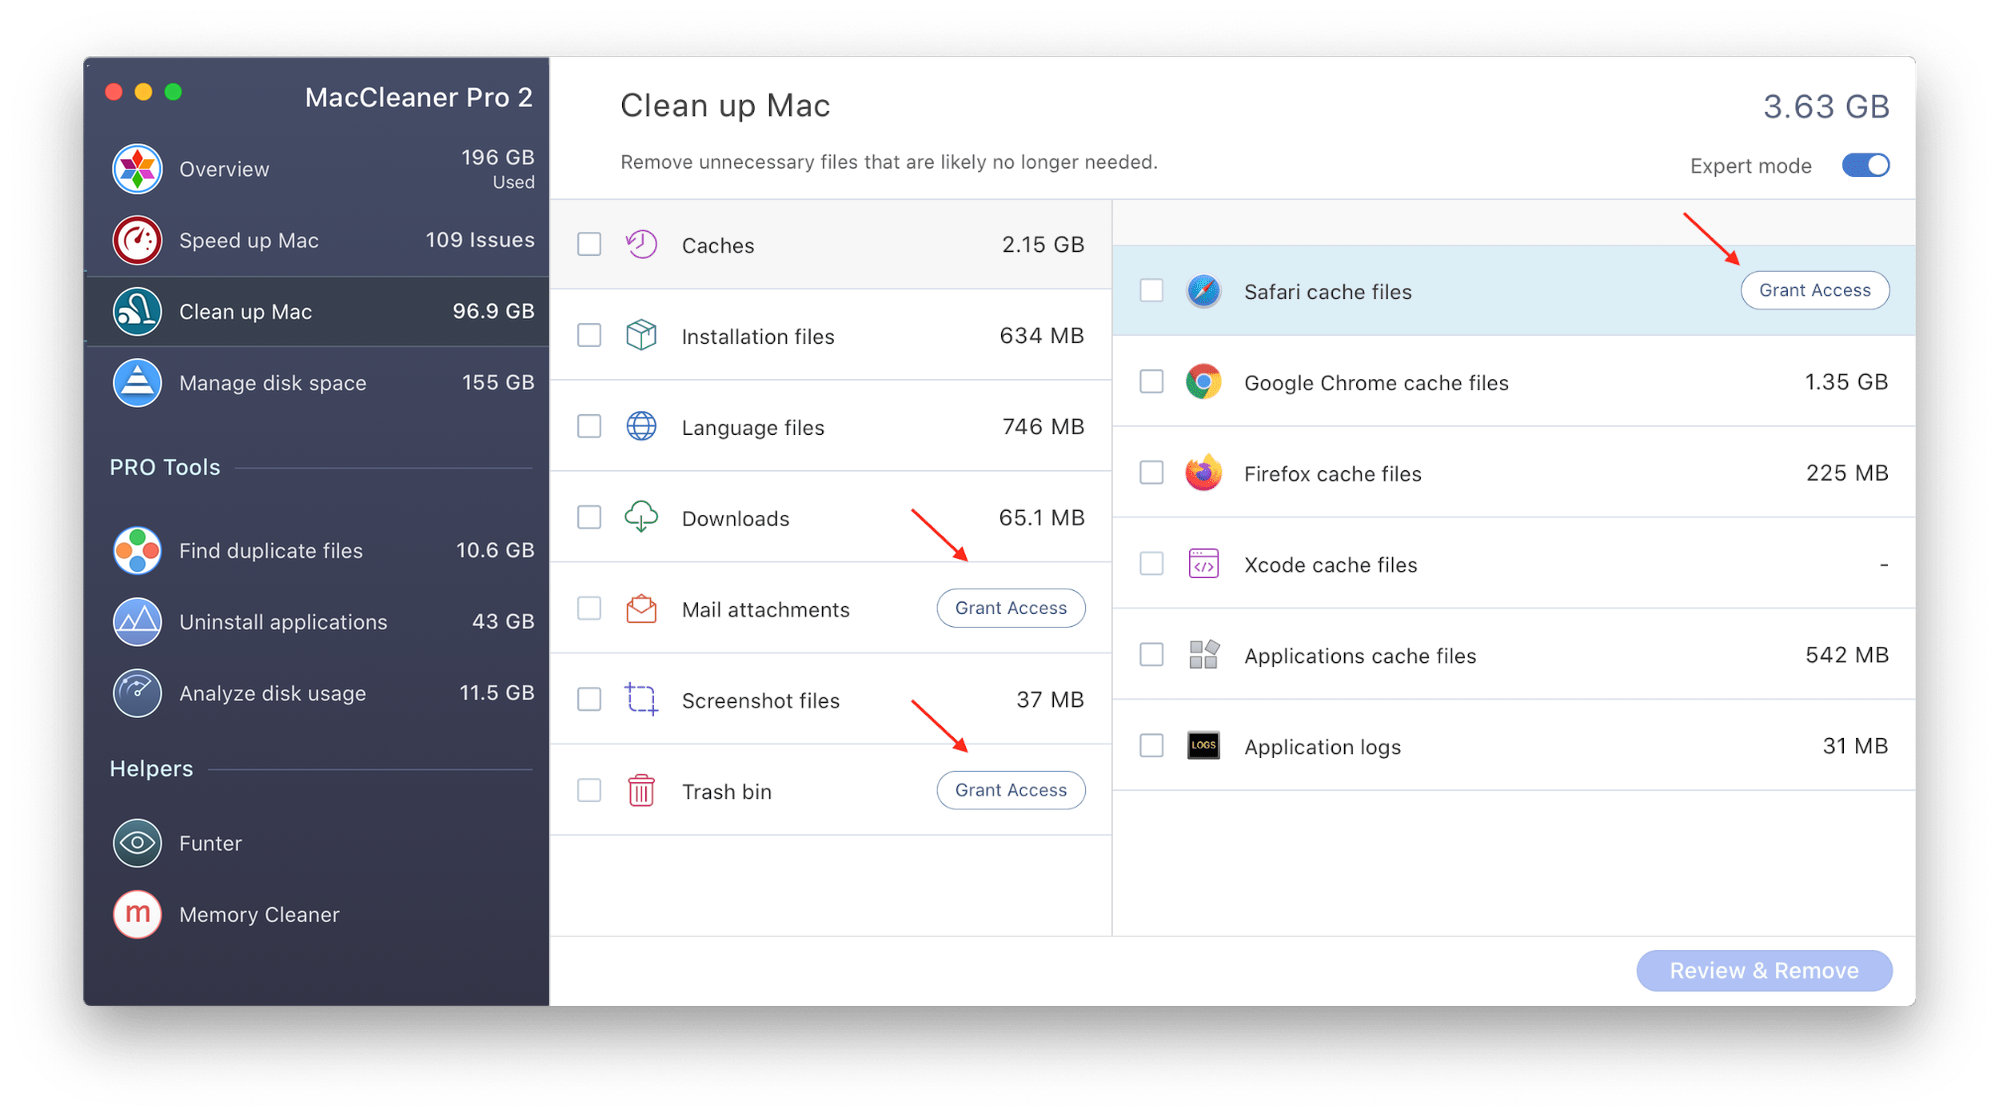 grant Full Disk Access to MacCleaner Pro app